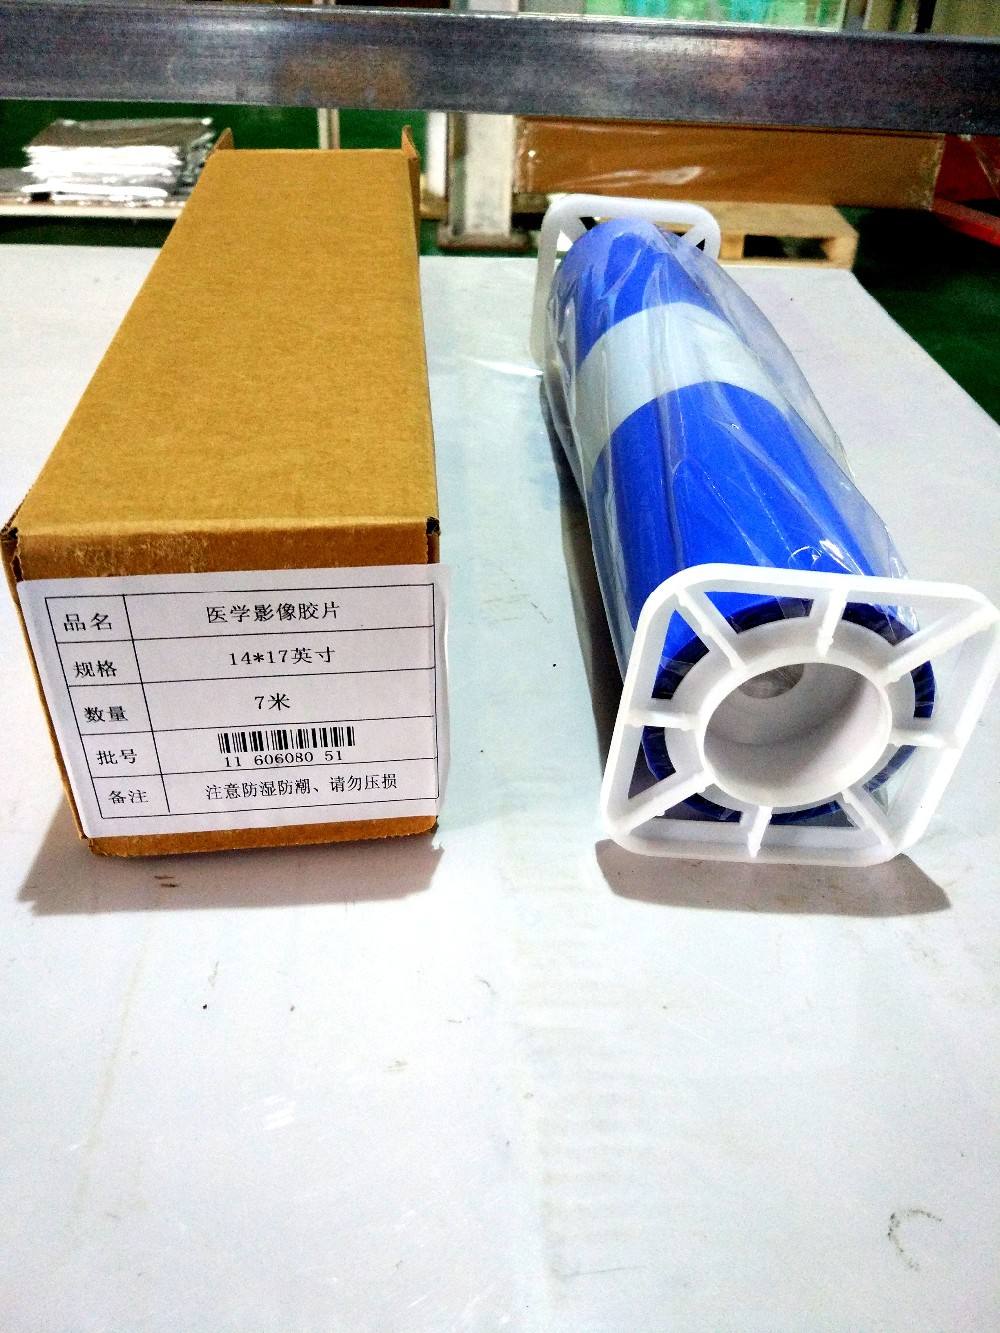 Hot selling-Blue Film PET Inkjet Printing Films for Medical X-ray Equipment High Quality